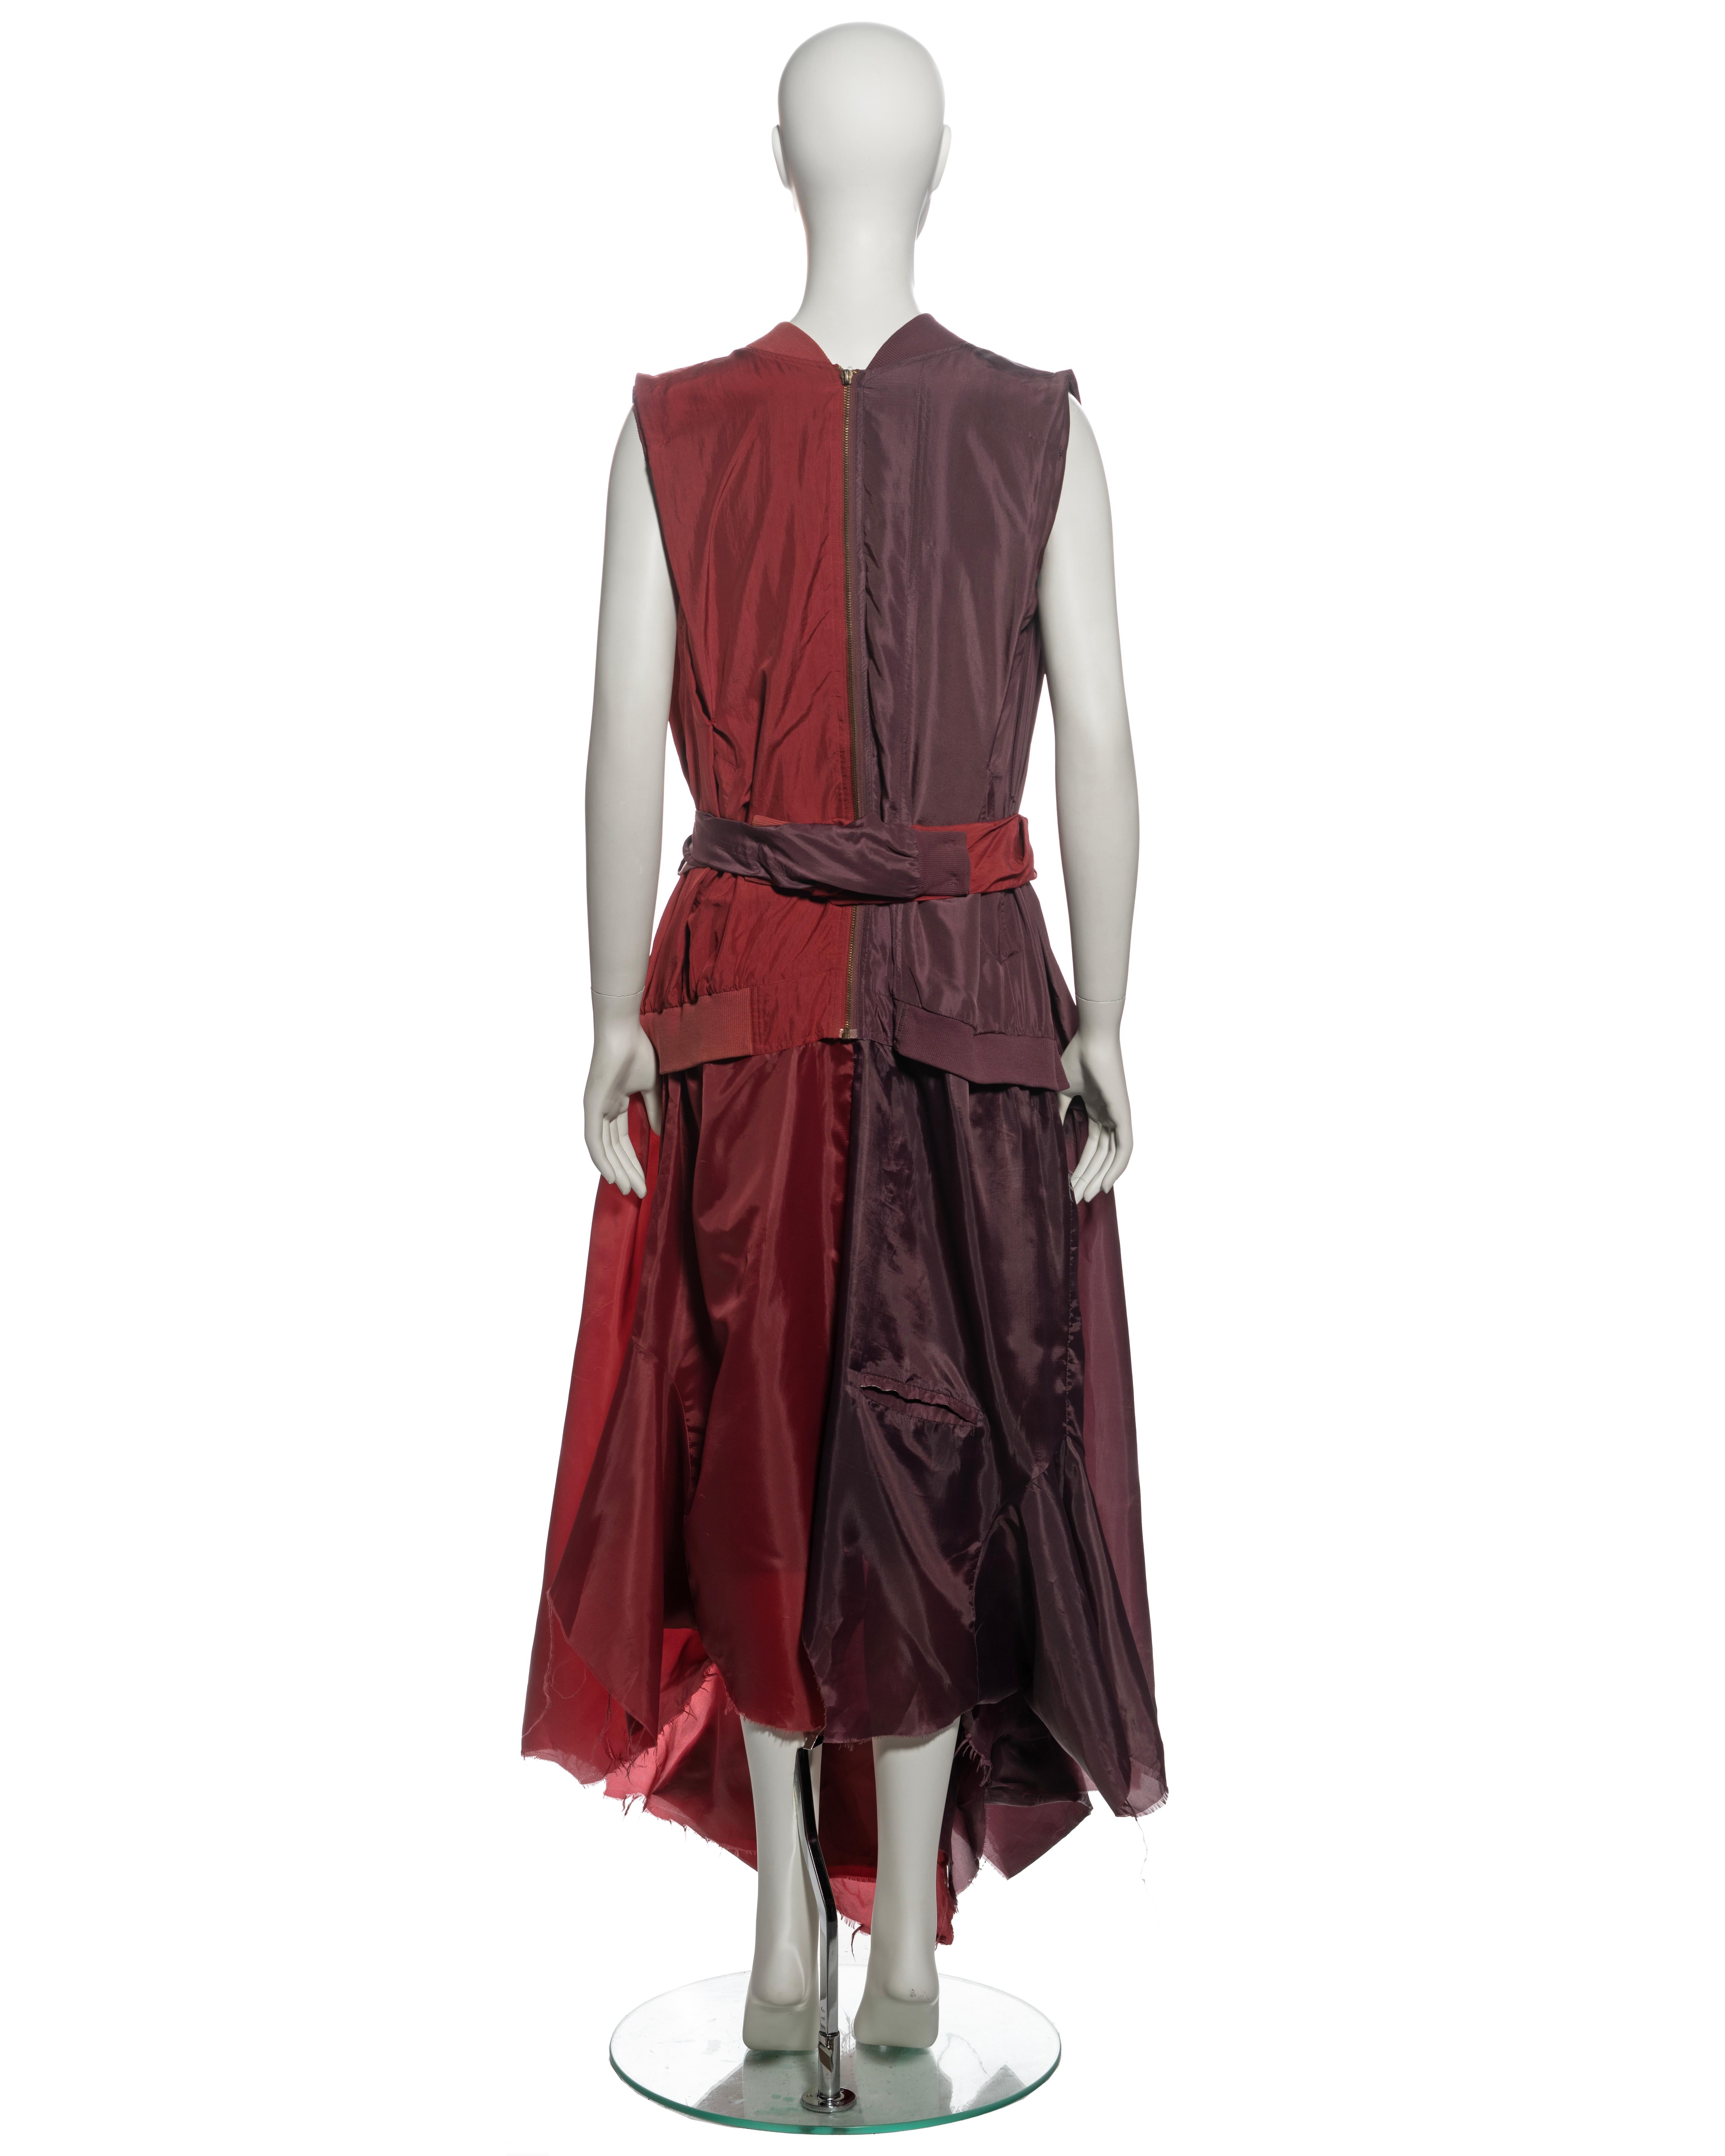 Martin Margiela Artisanal Dress Made Out of Vintage Blouson Jackets, fw 2004 For Sale 4